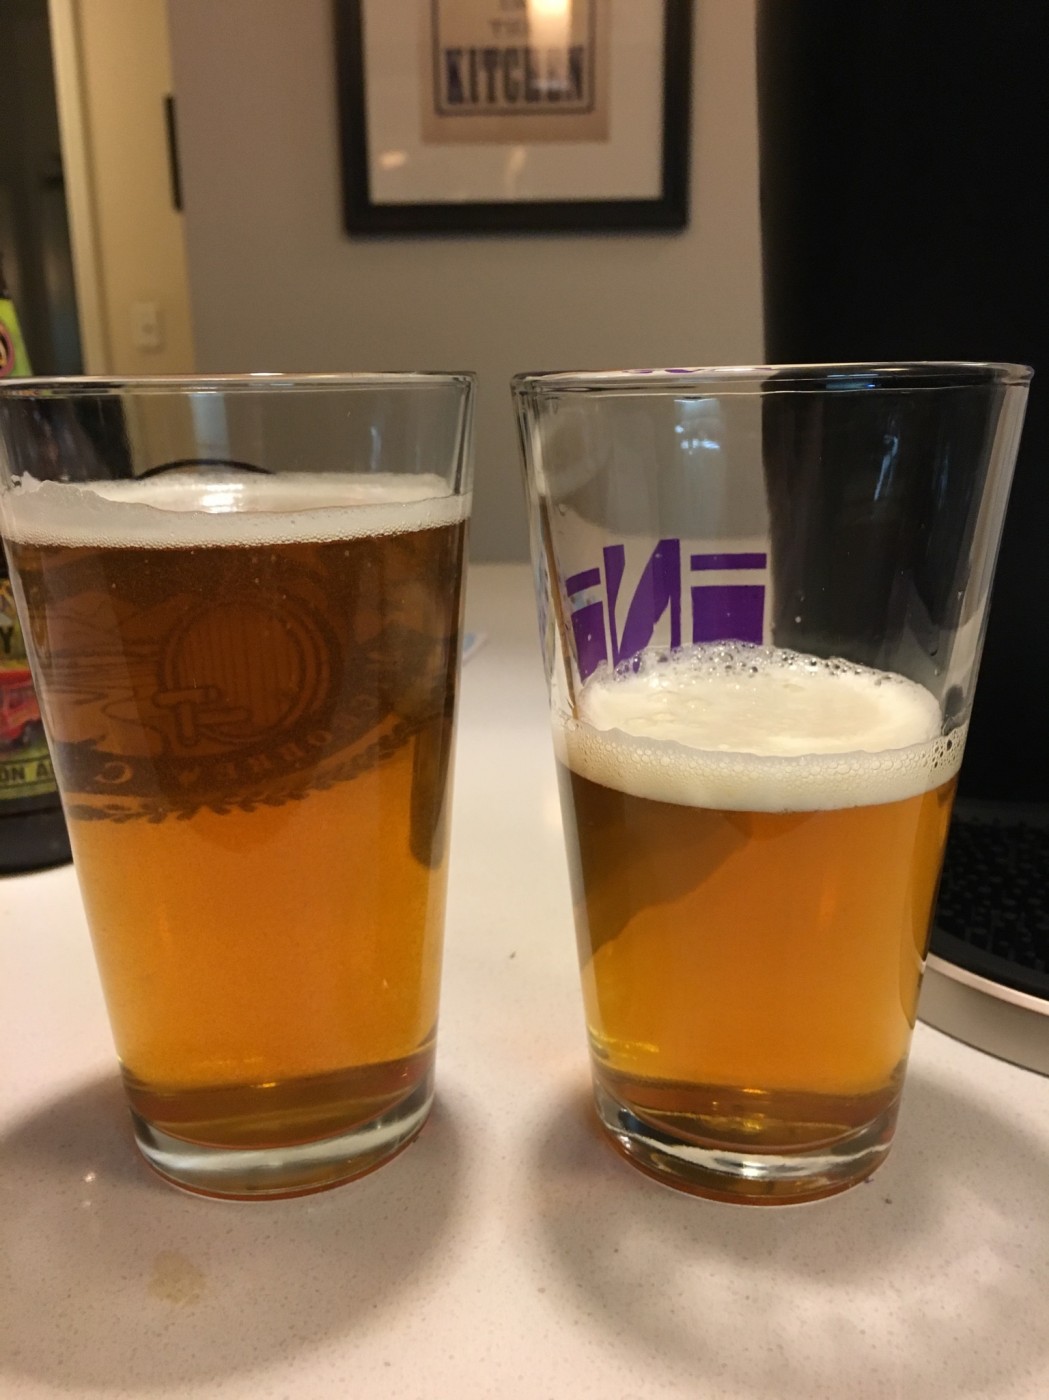 The glass on the right was poured with the Fizzics. The head is smoother and the taste was definitely creamier. 